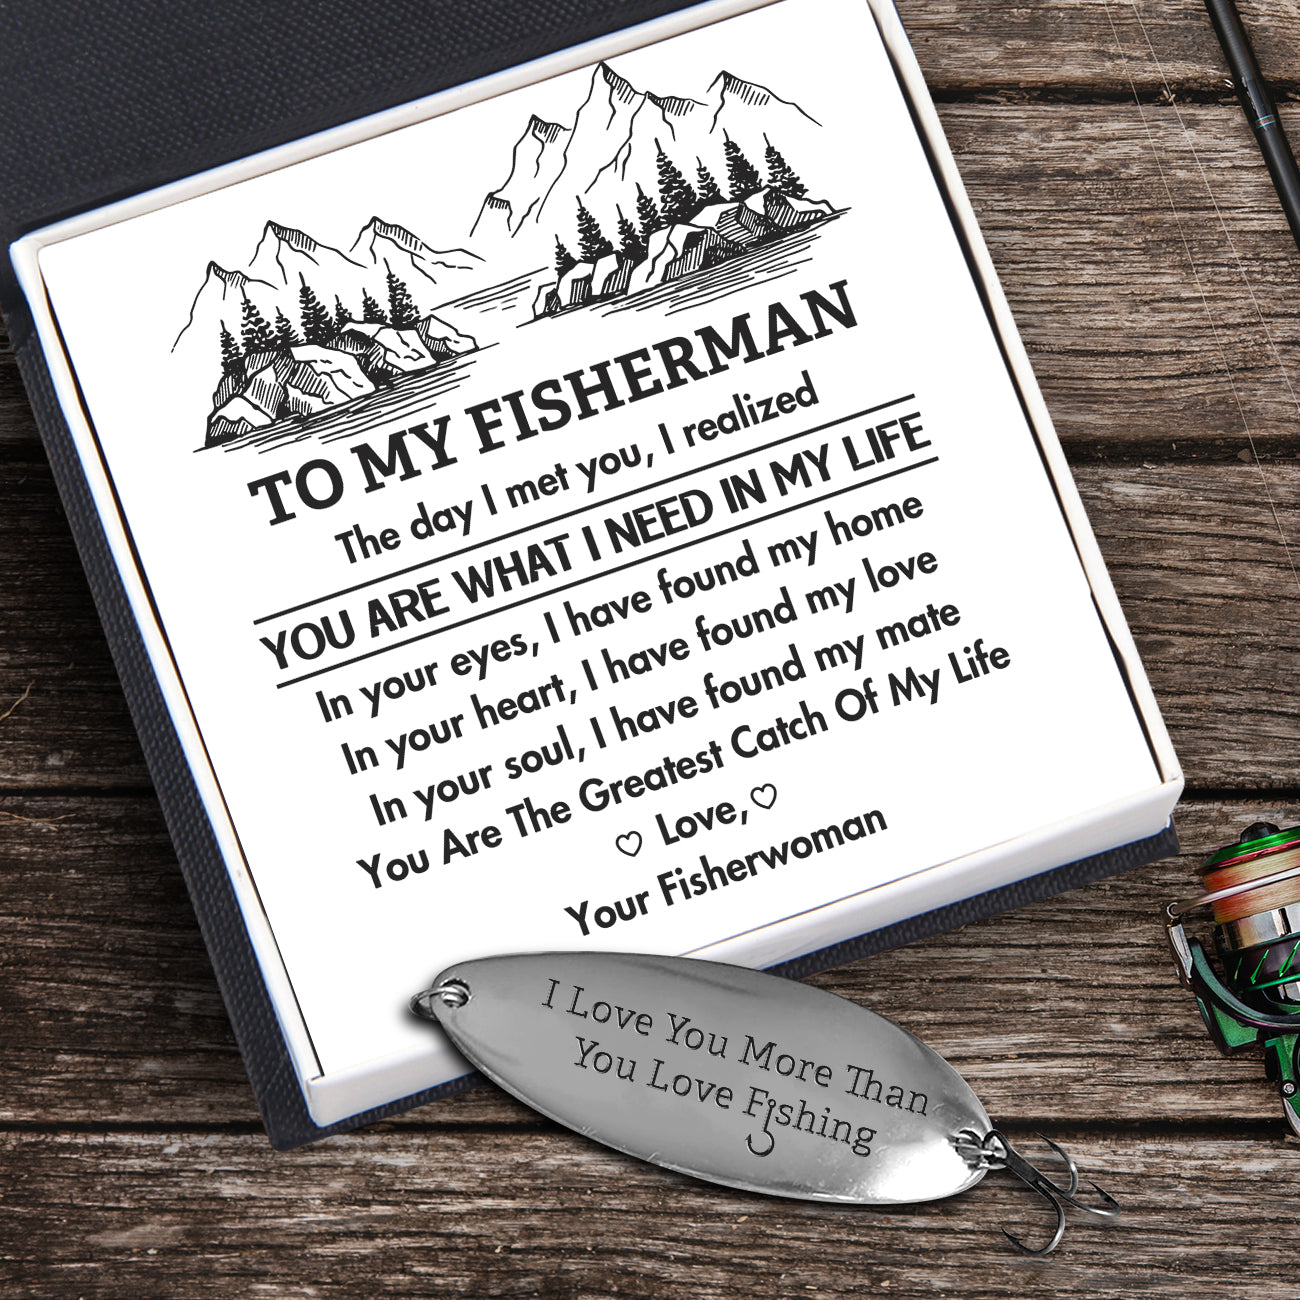 Fishing Lure - Fishing - To My Fisherman - You Are The Greatest Catch Of My Life - Ukgfb26001